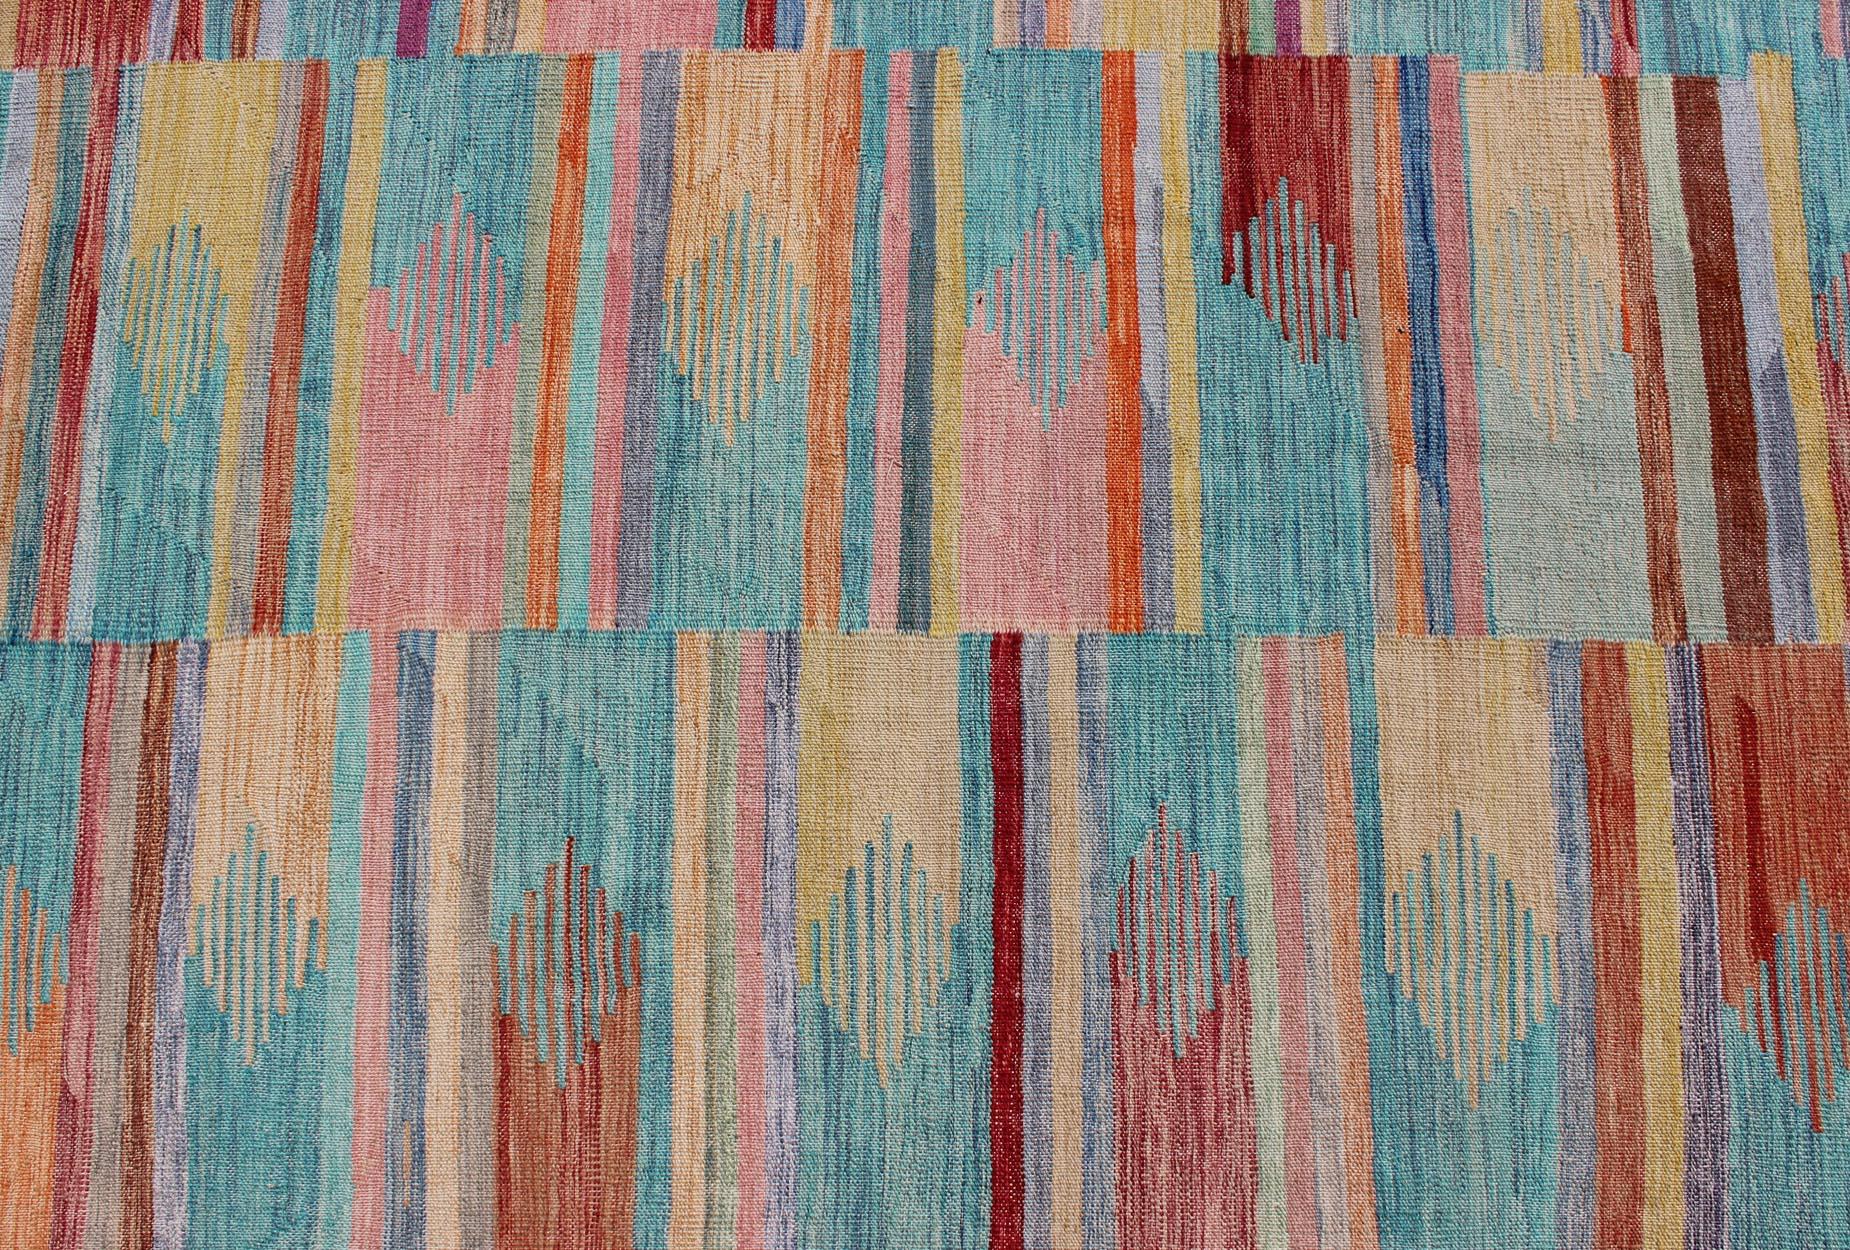 Contemporary Colorful Flat-Weave Kilim Rug with Modern Design